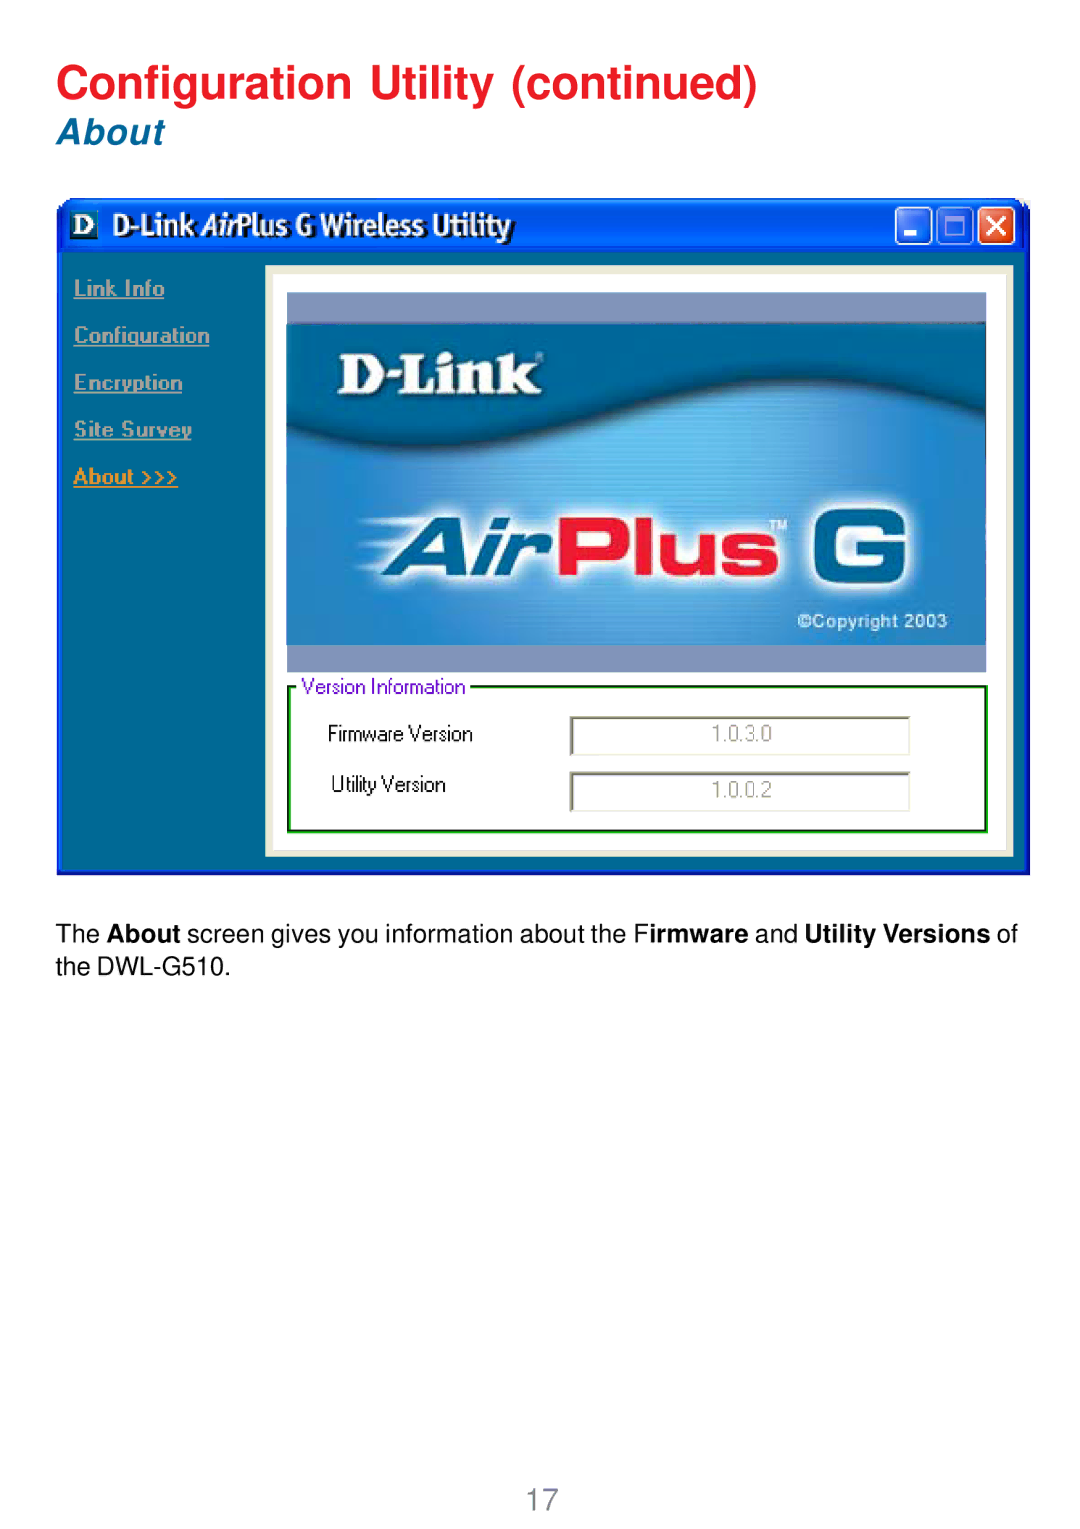 D-Link DWL-G510 manual About 